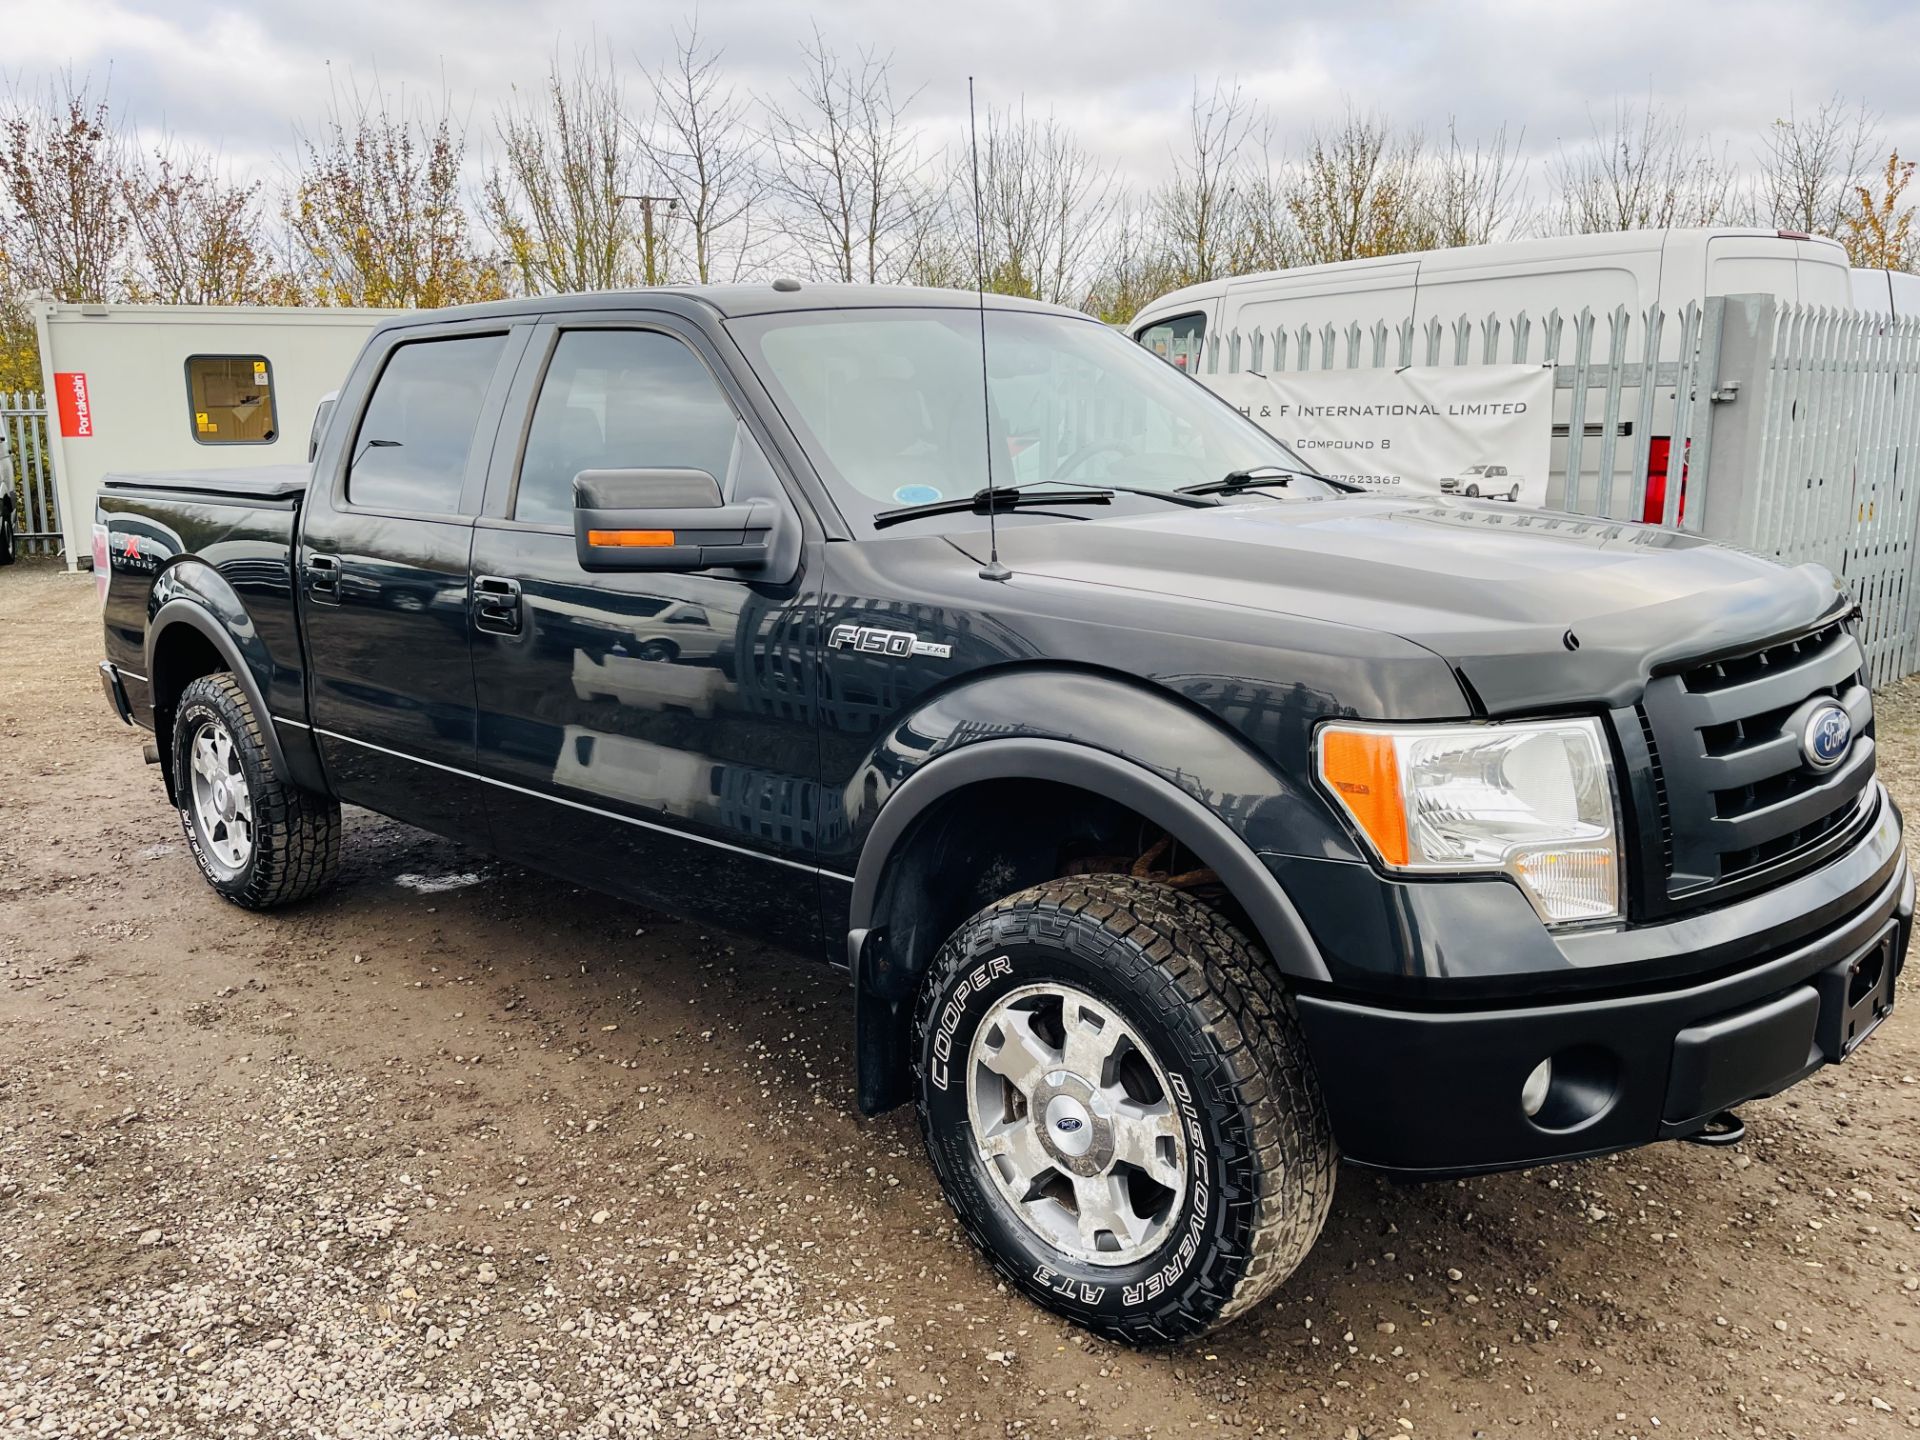 Ford F-150 3.5L V6 SuperCab 4WD FX4 Edition '2010 Year' Colour Coded Package - Top Spec - Image 9 of 24